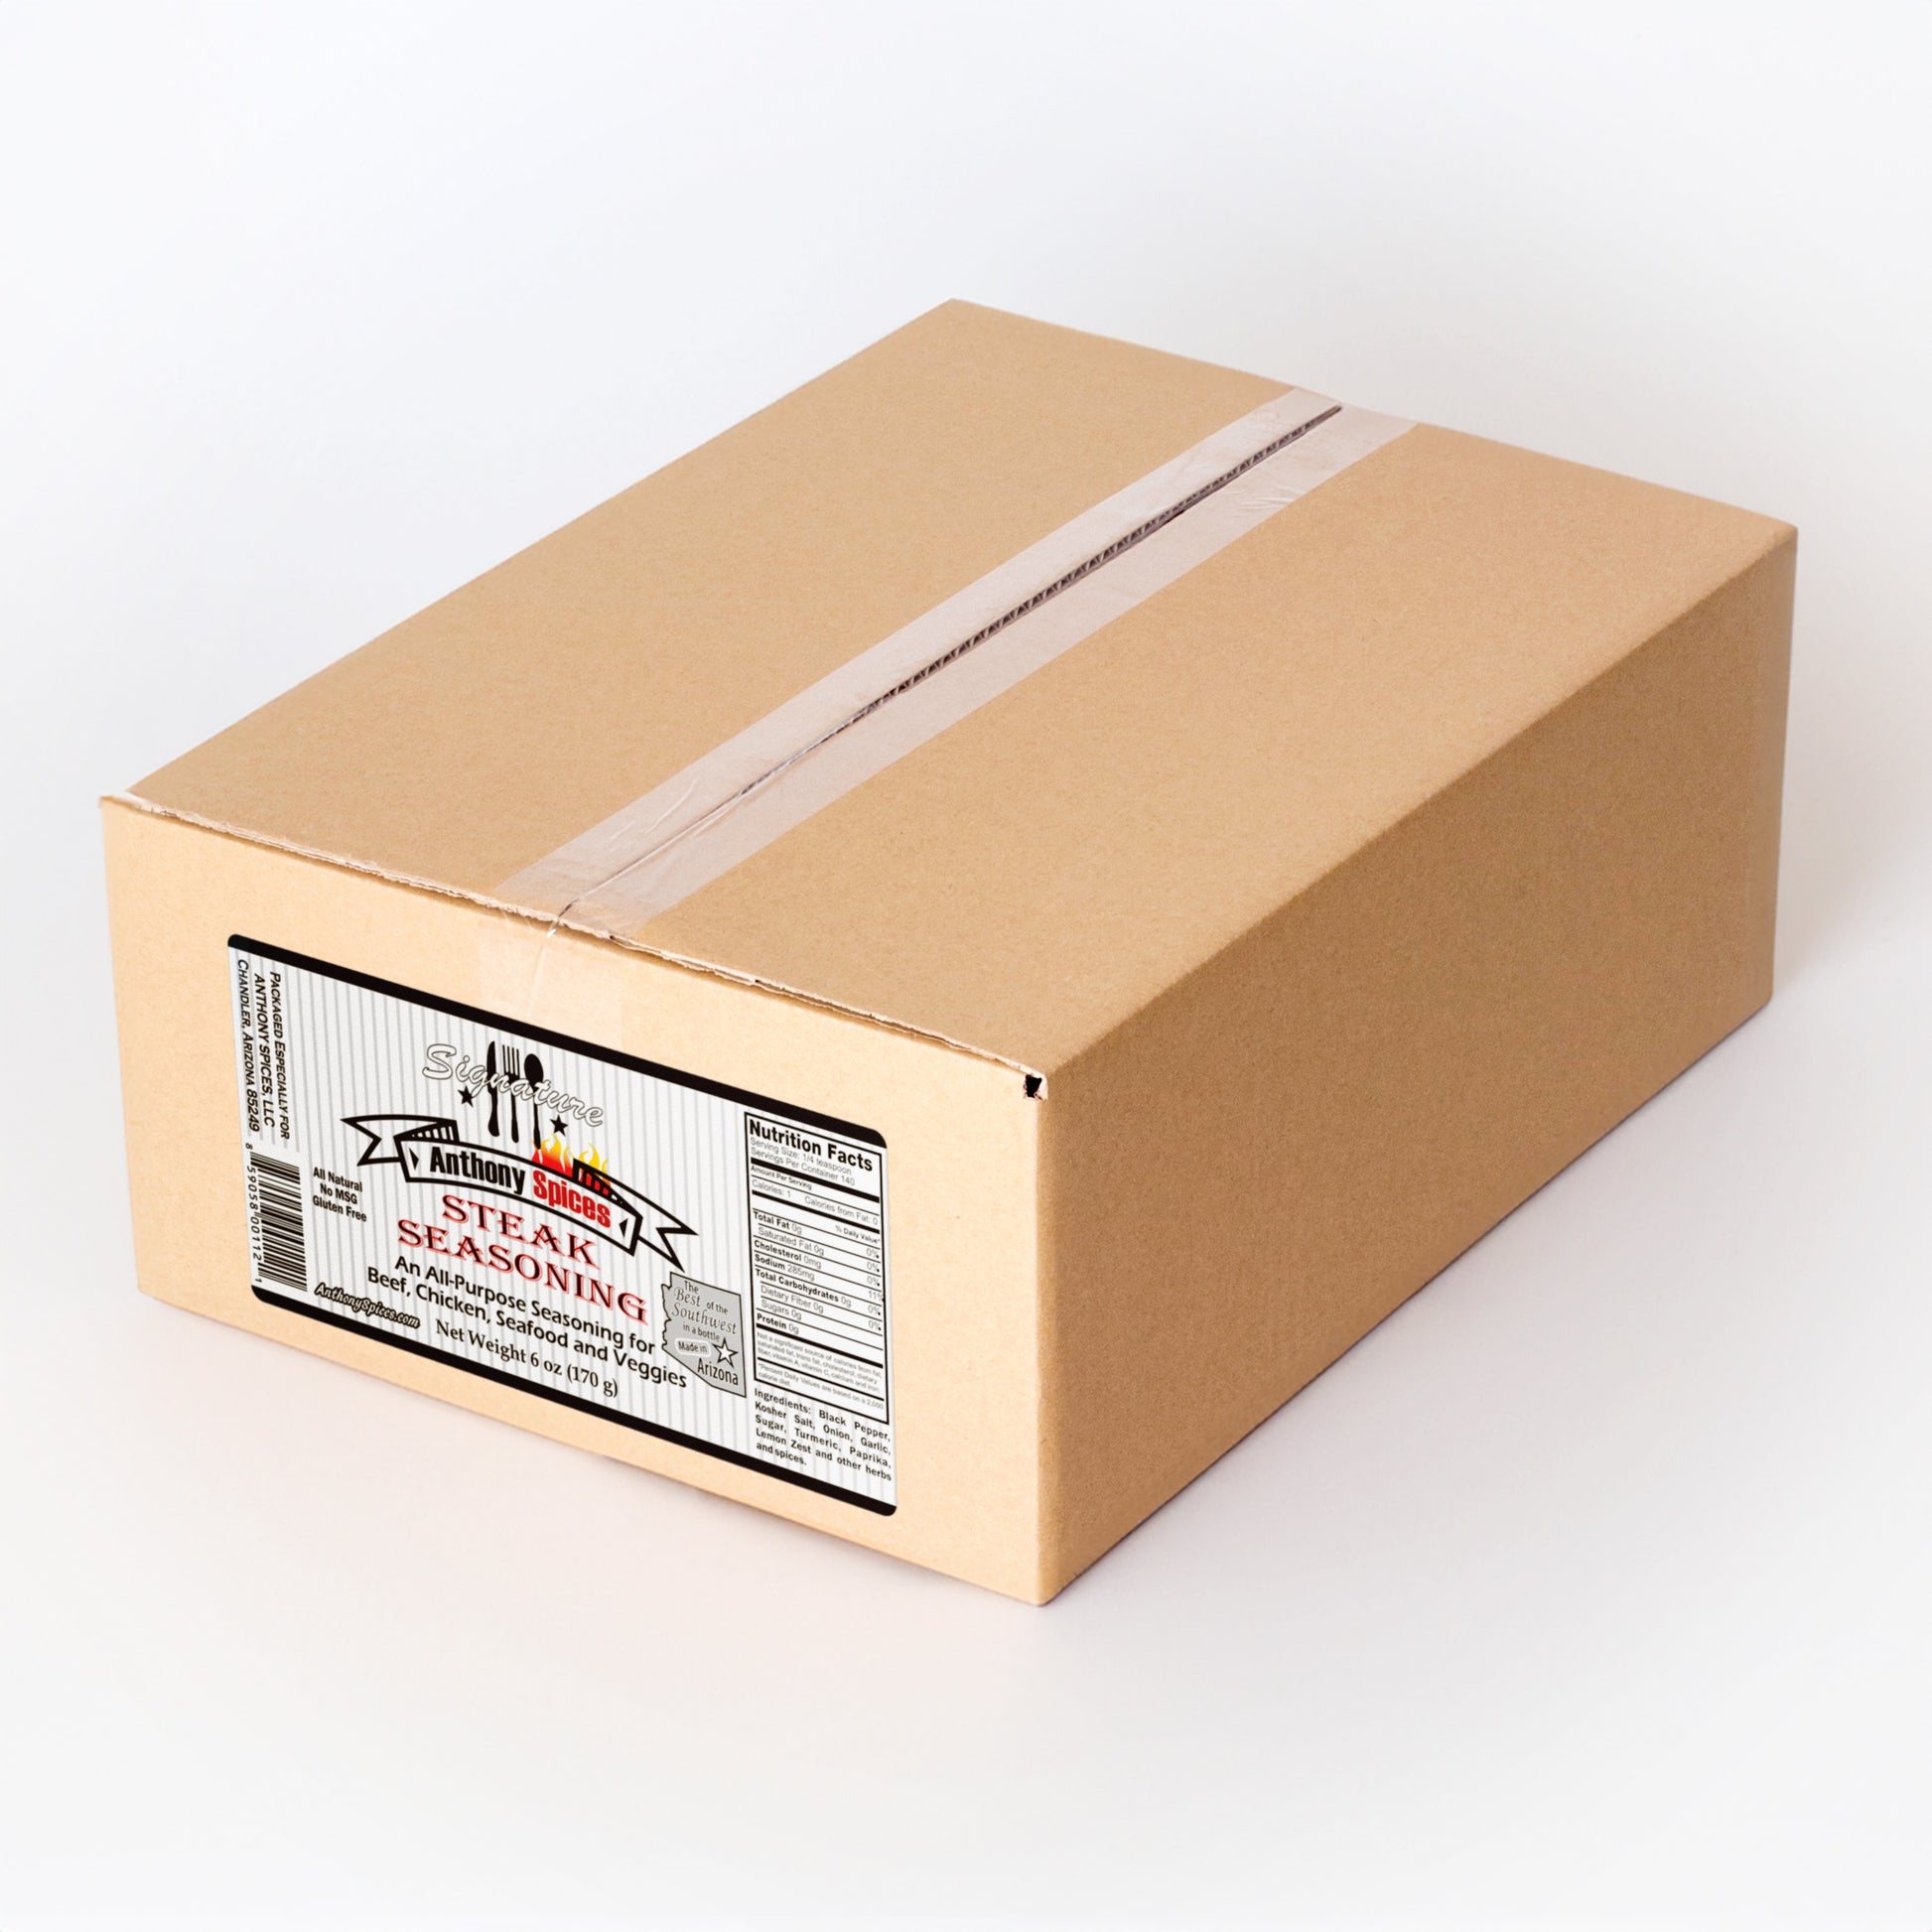 Case of 12 (6oz Bottles) of Signature Steak Seasoning - Closed shipping box with label